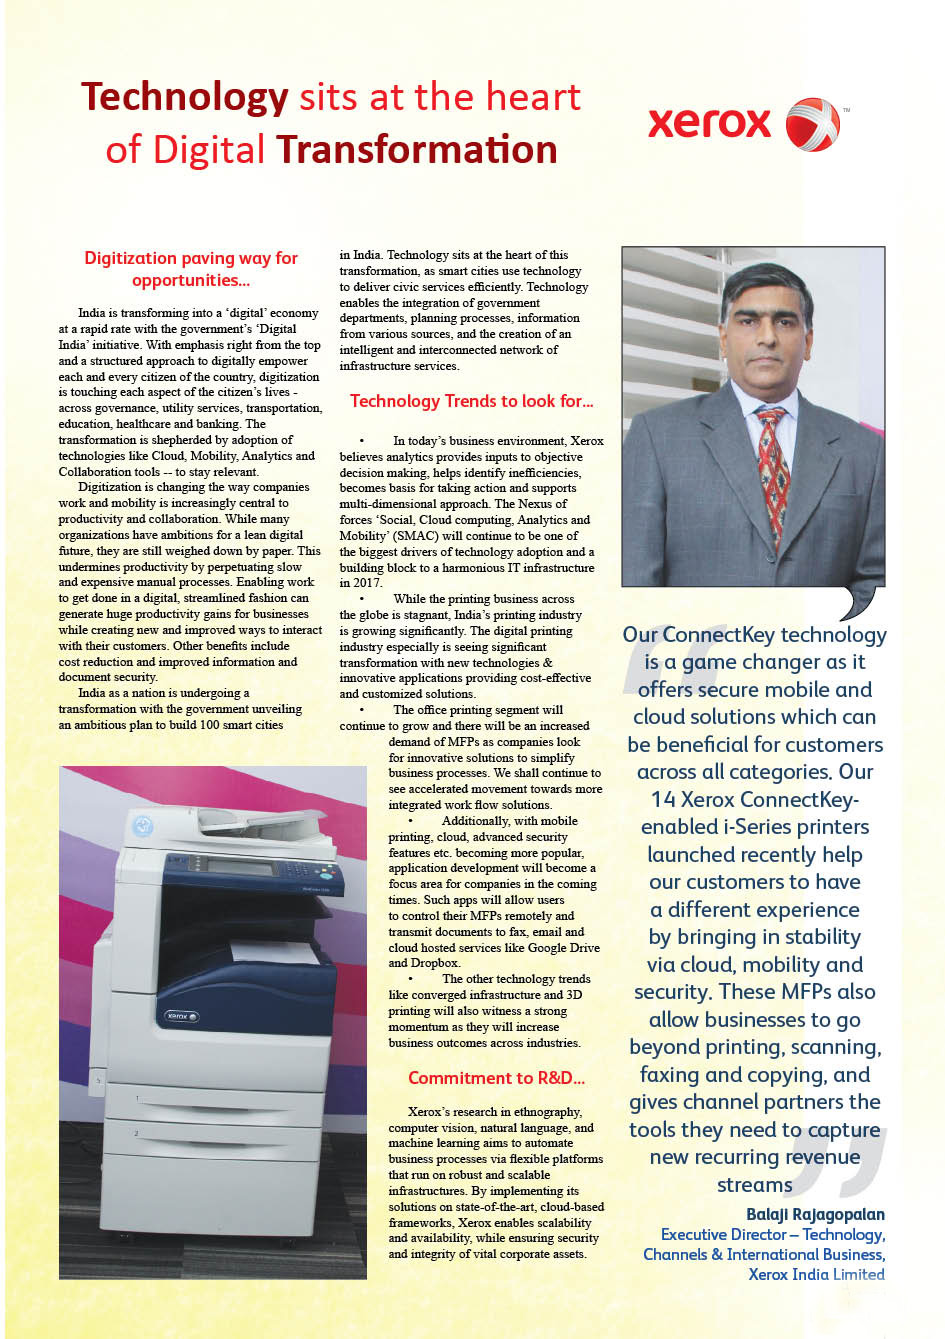 XEROX INDIA PVT. LTD. : Technology sits at the heart of Digital Transformation